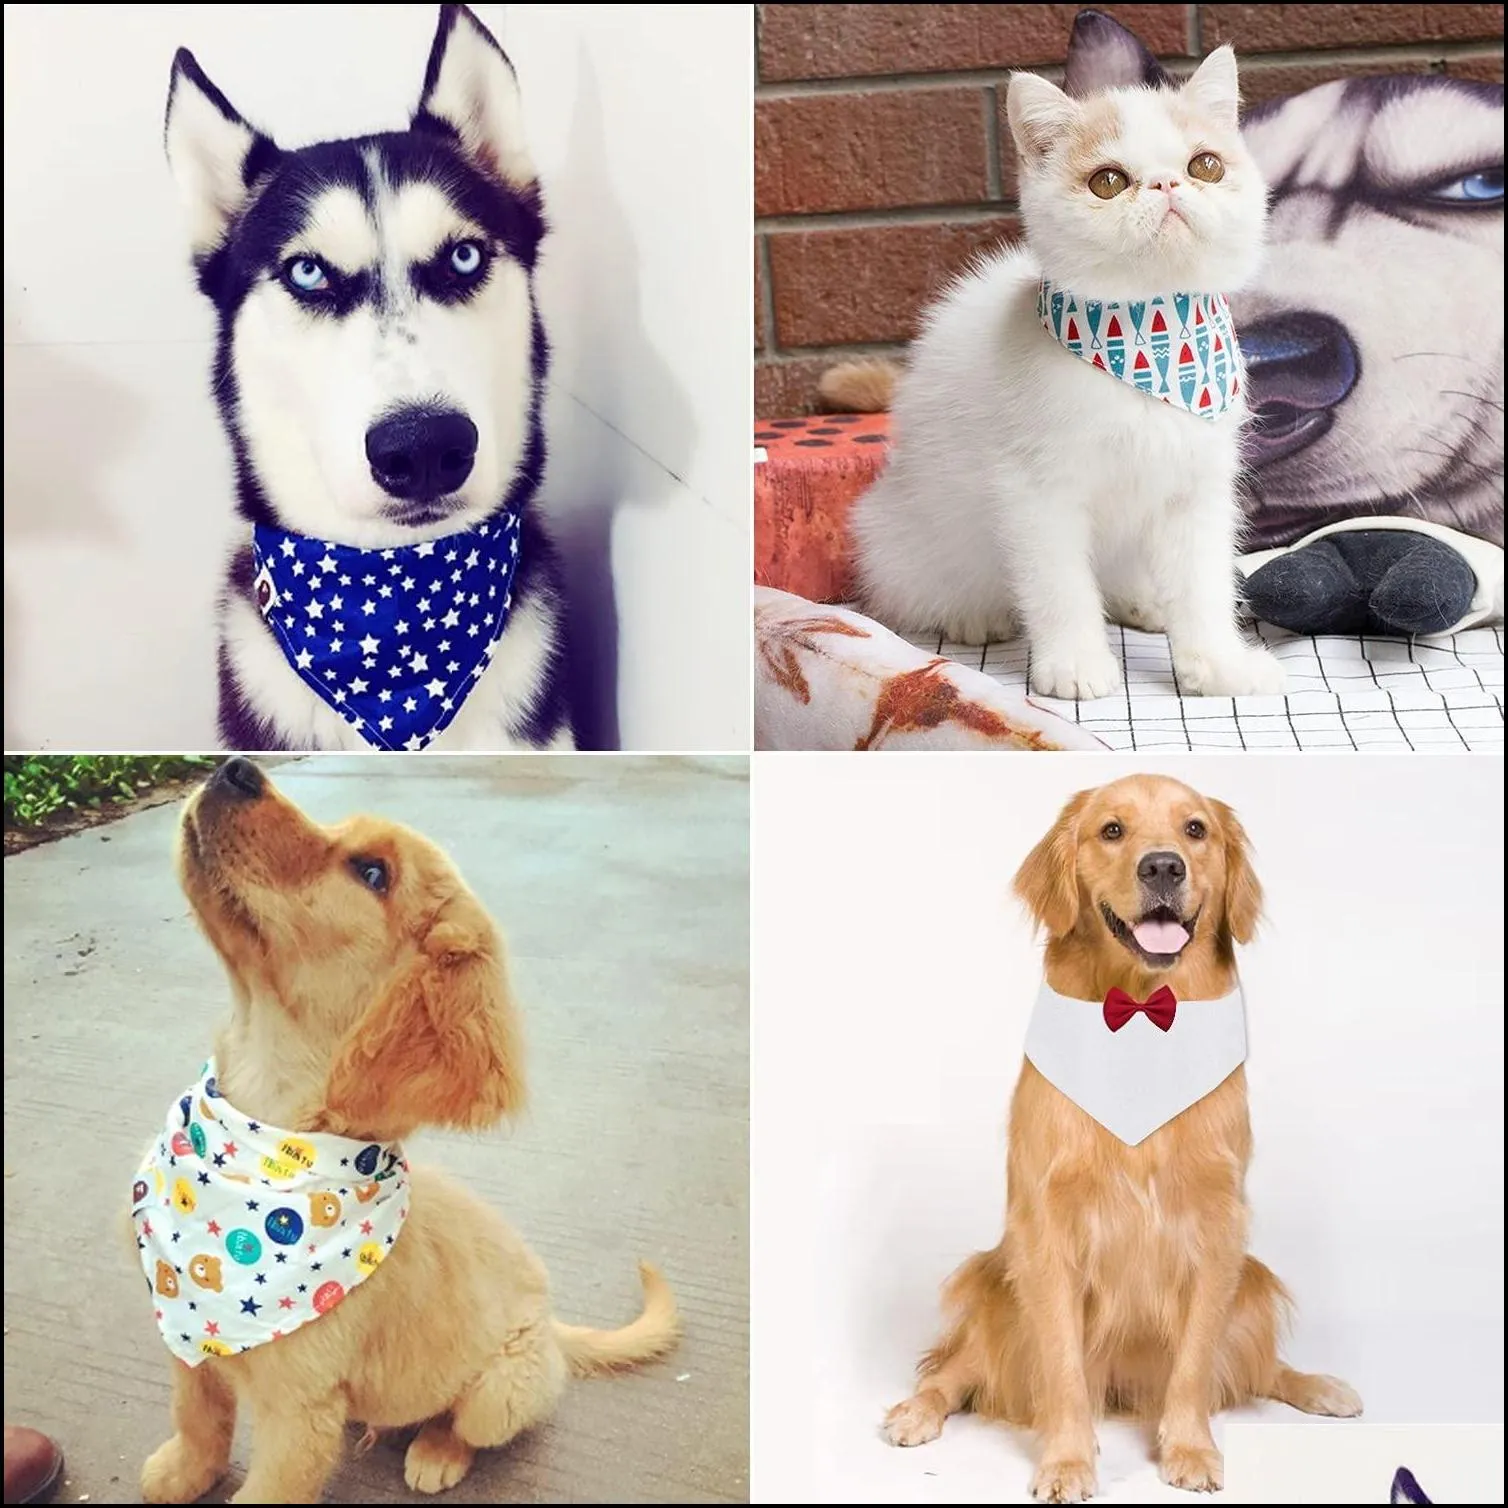 blank dog bandanas solid white diy pet bandanas triangle scarf pet heat transfer triangle bibs accessories for dogs puppy cats